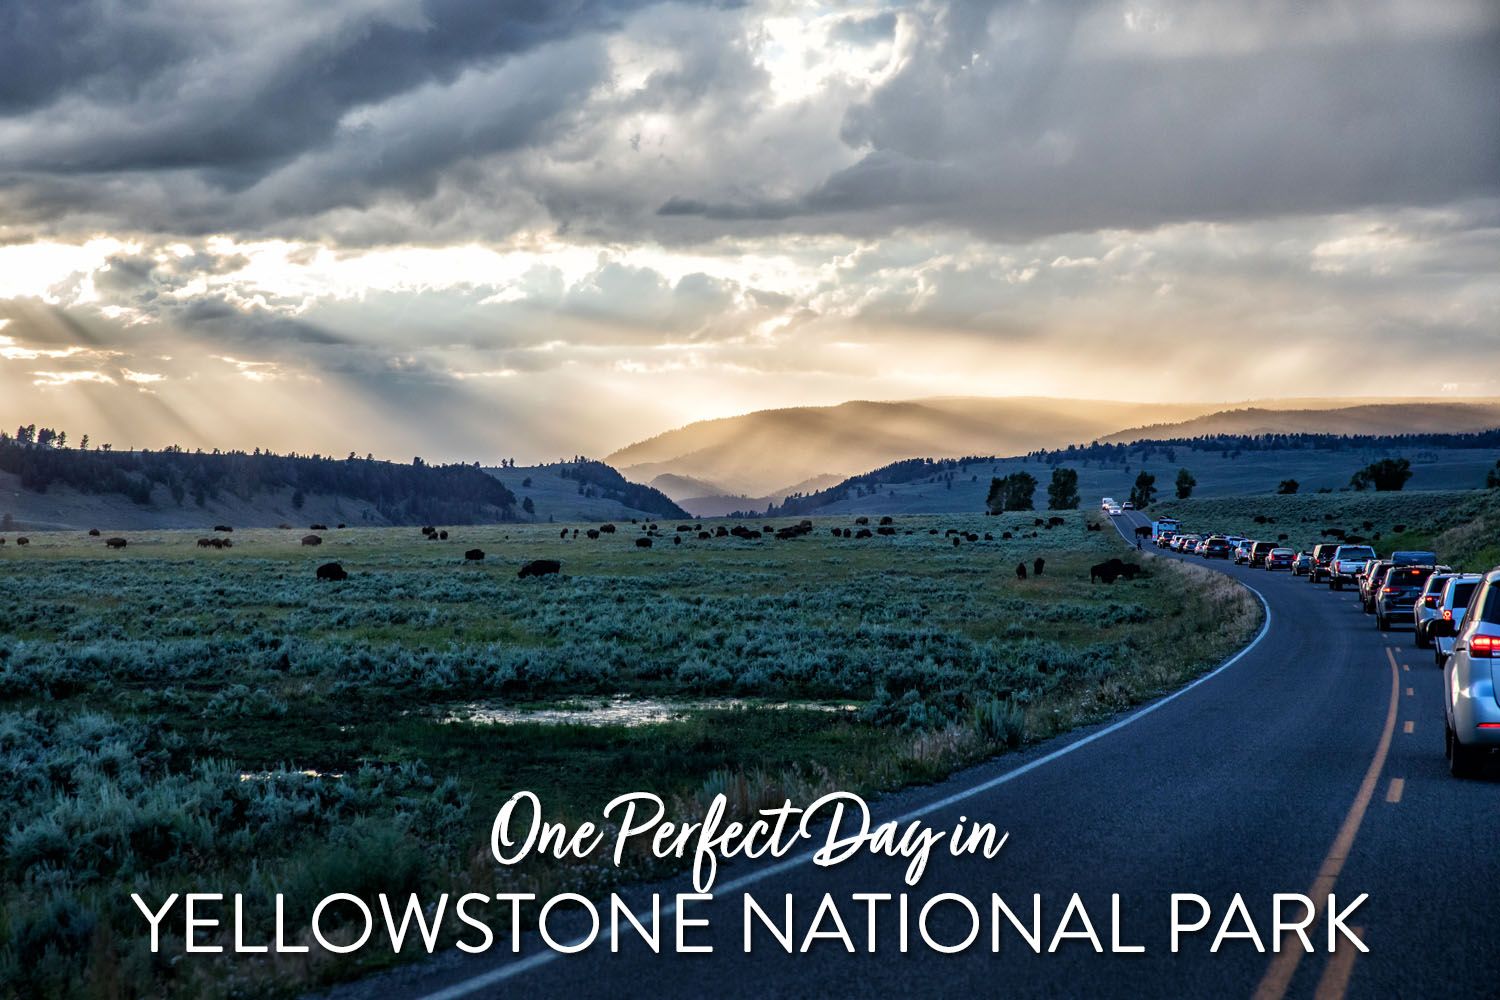 One Day in Yellowstone